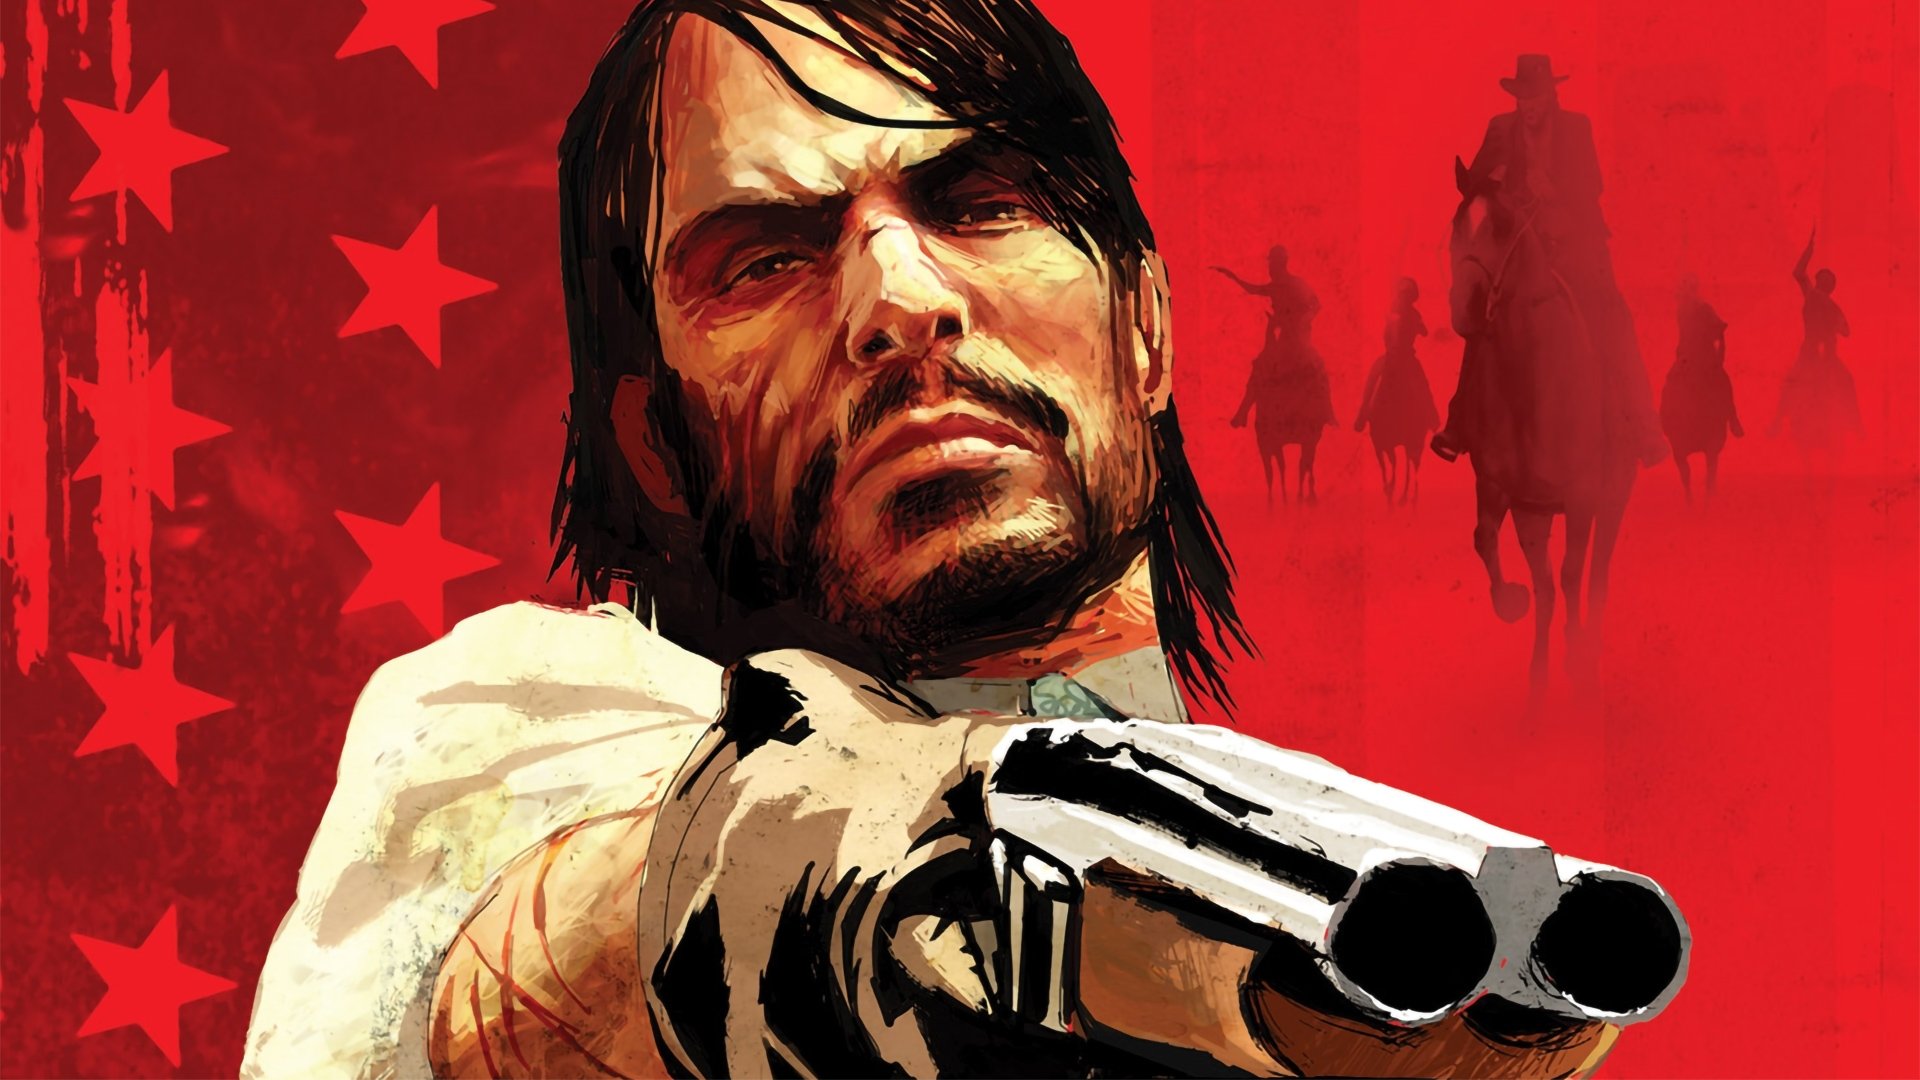 Red Dead Redemption 2 for PS5 to Release after GTA 6, Insider Claims